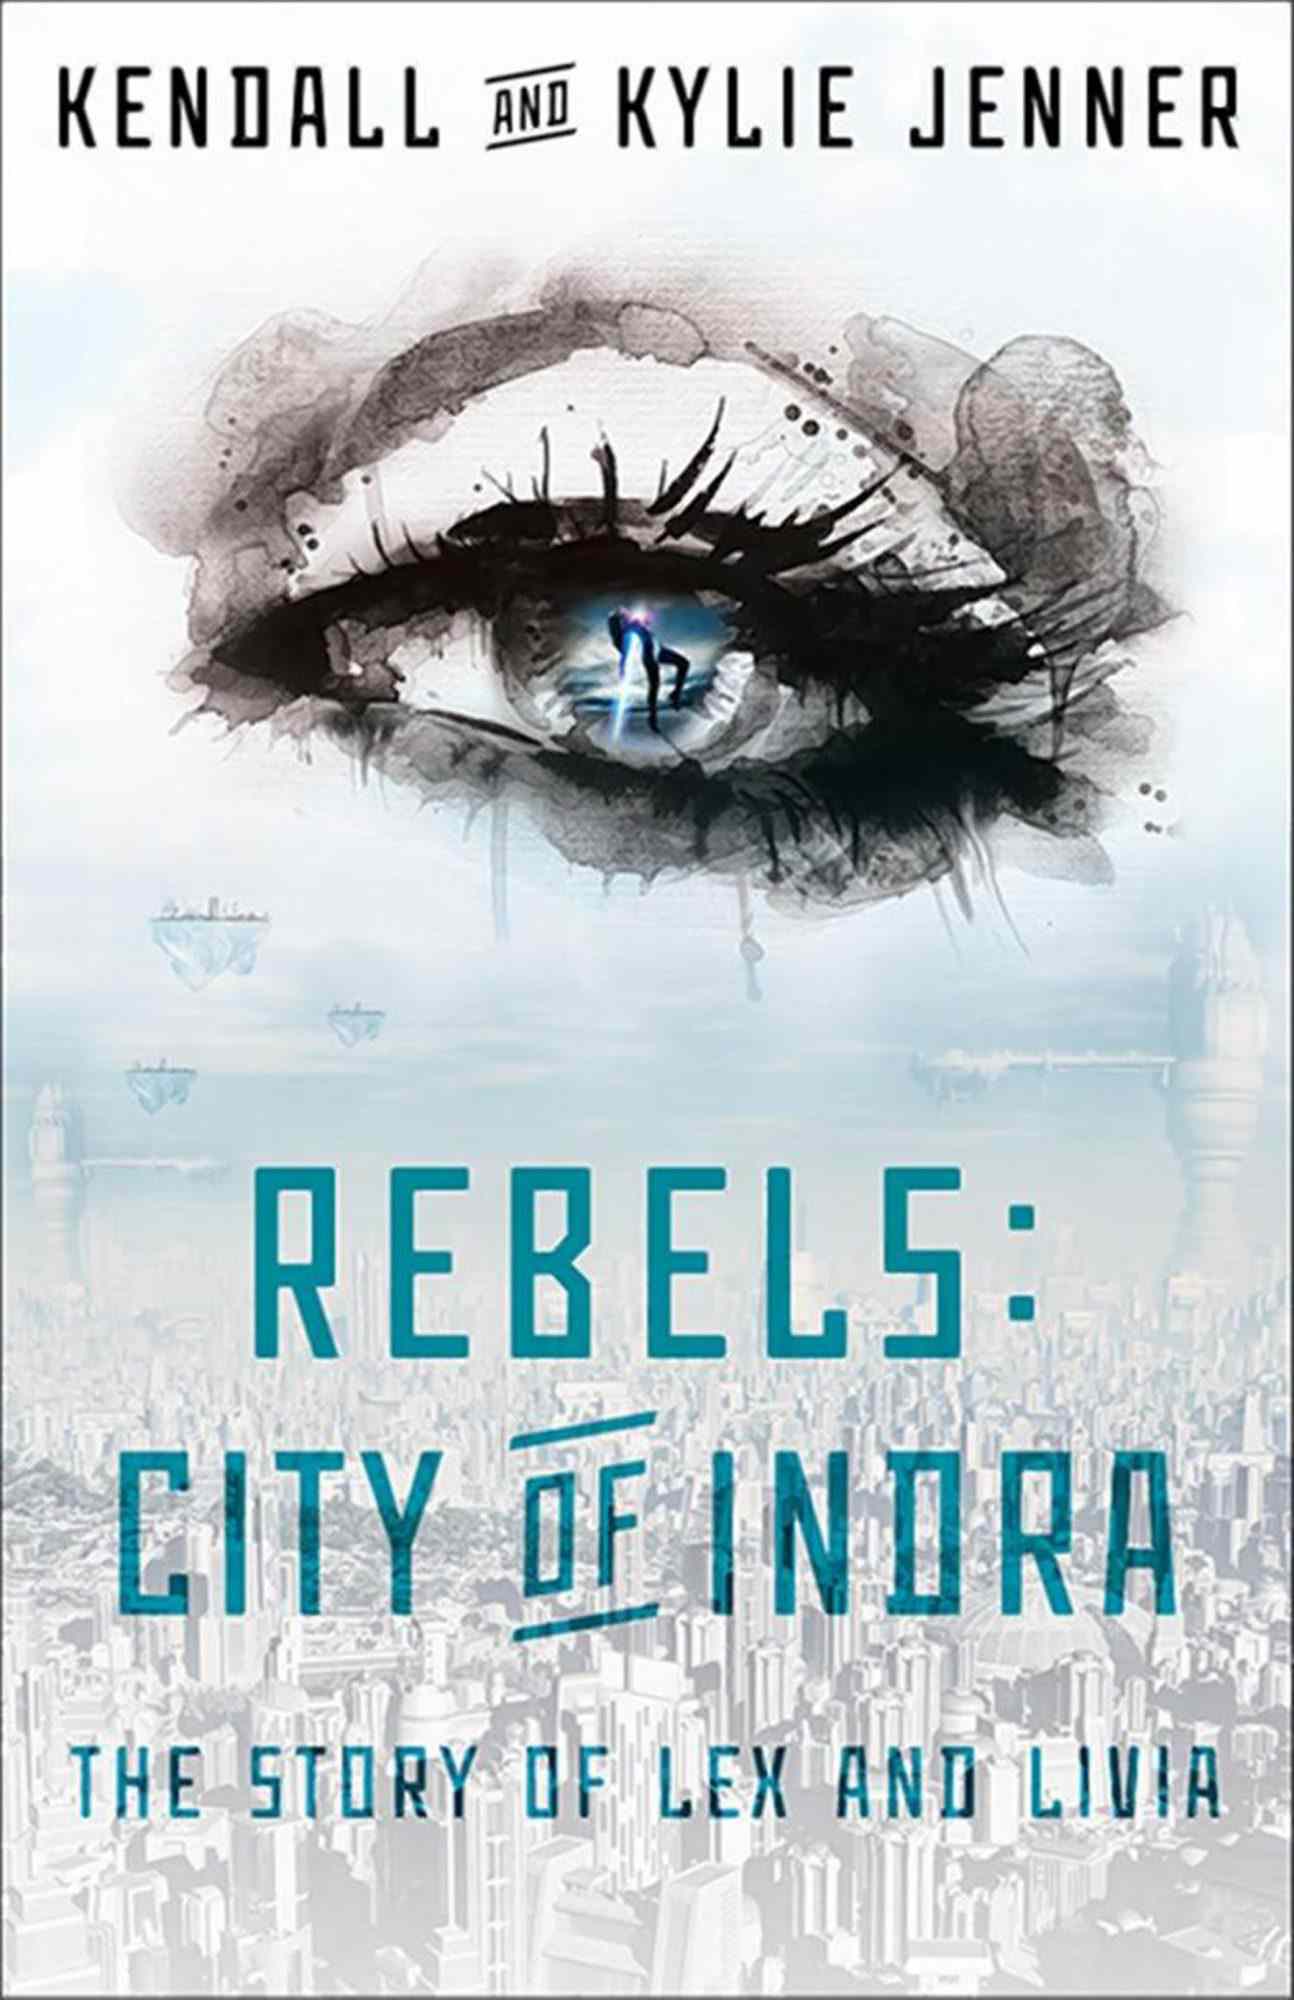 Kendall and Kylie Jenner, Rebels: The City of Indra